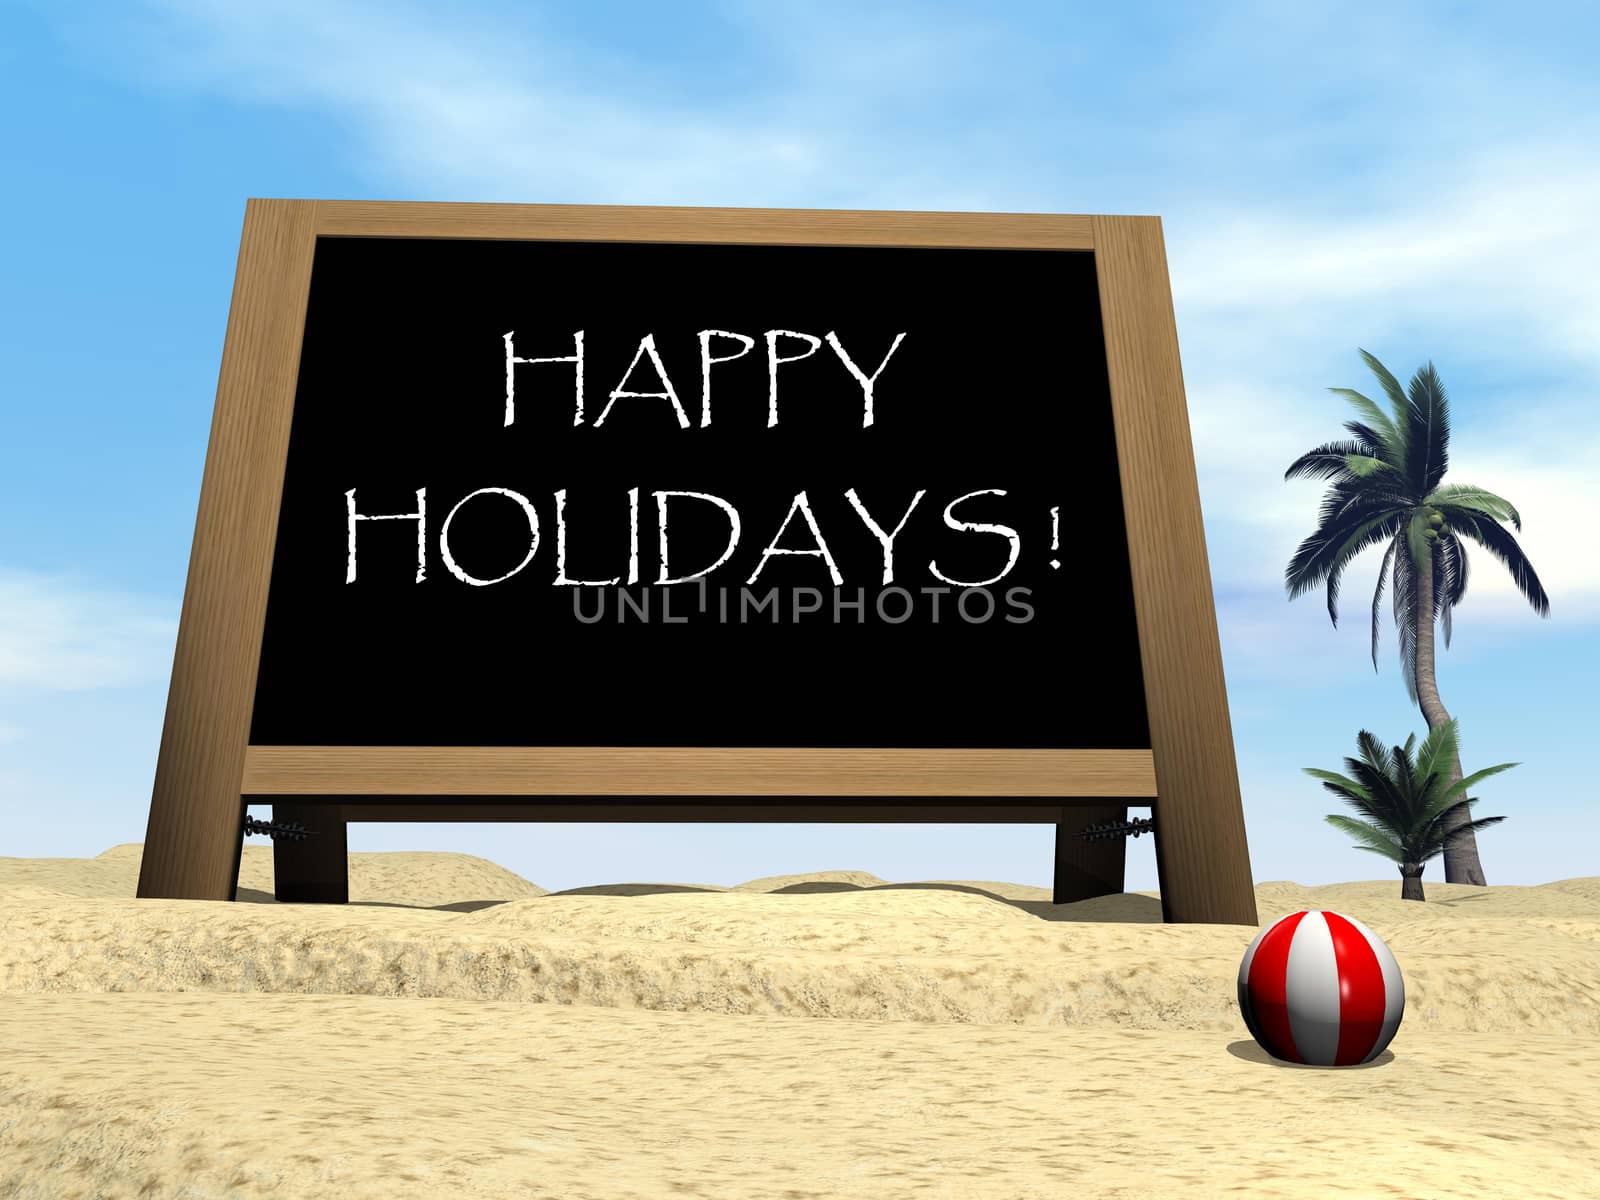 Happy holidays at the beach - 3D render by Elenaphotos21